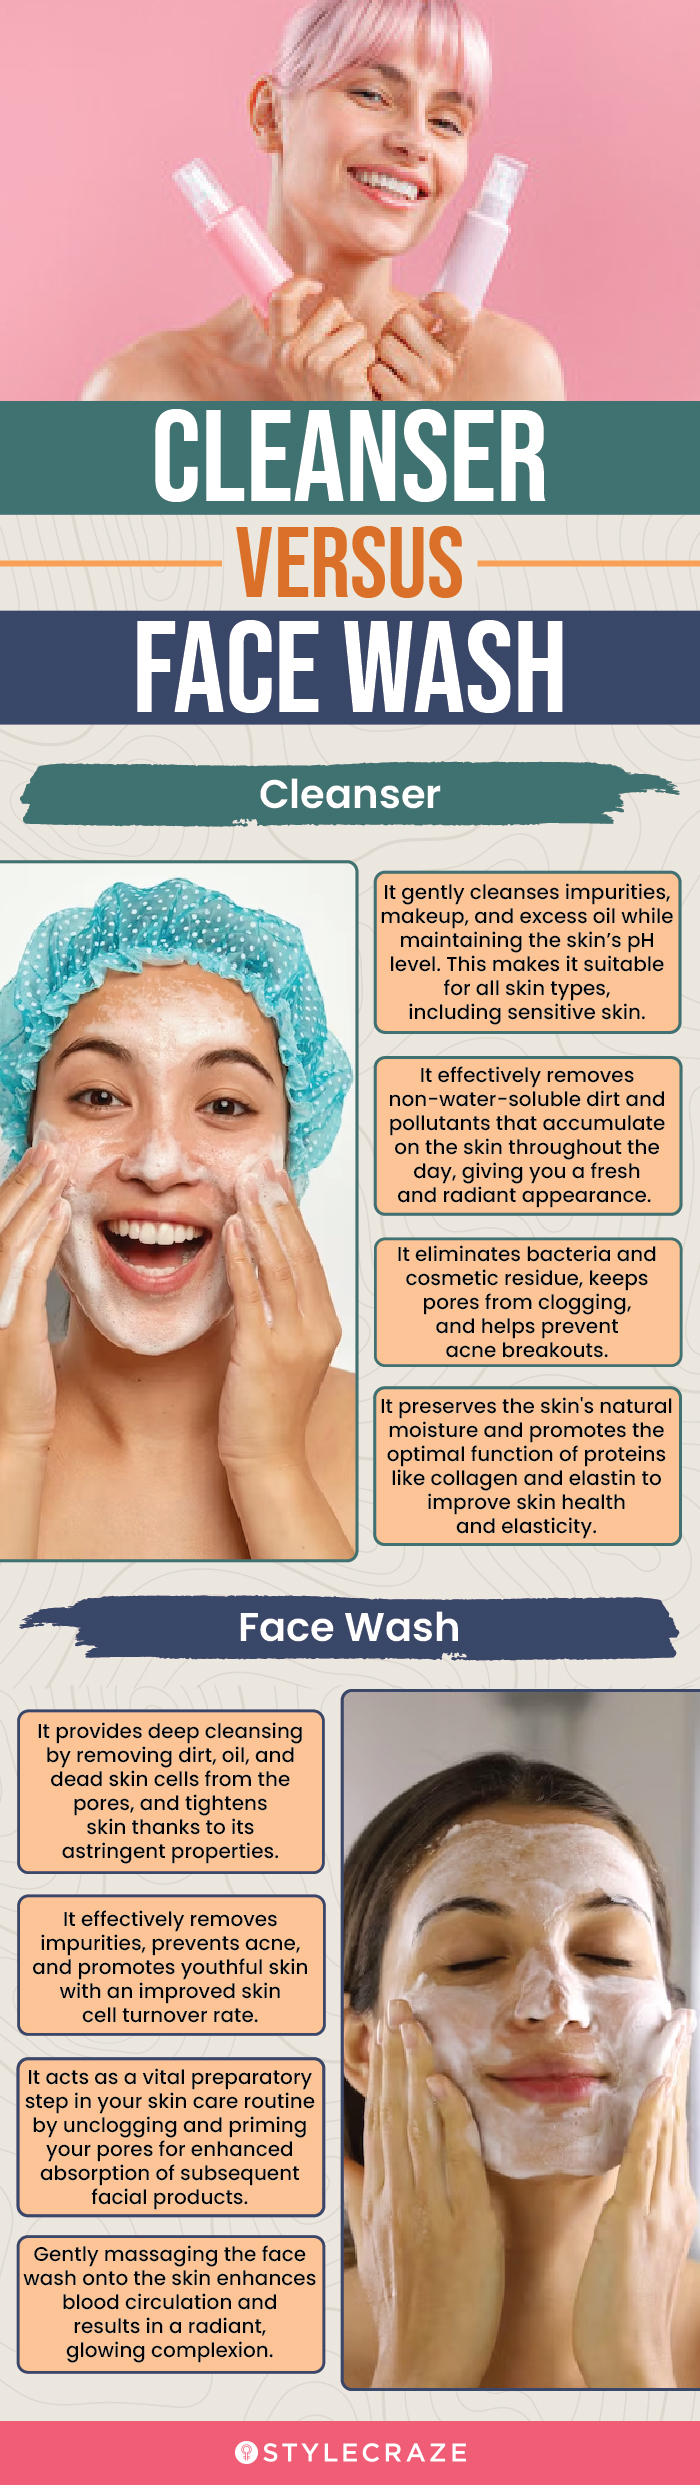 cleanser versus face wash (infographic)